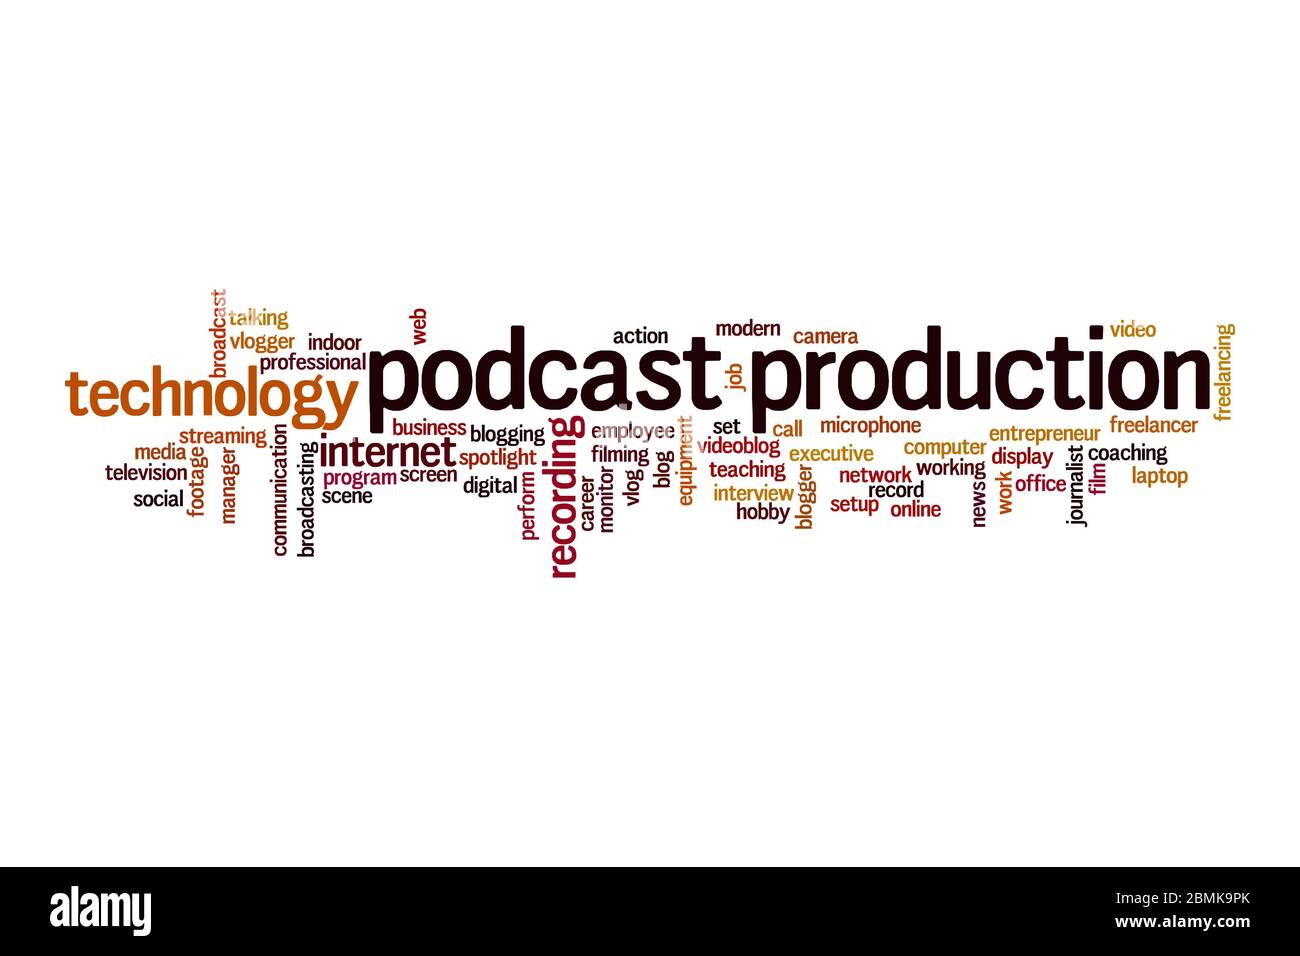 Podcast production word cloud concept on white background Stock Photo